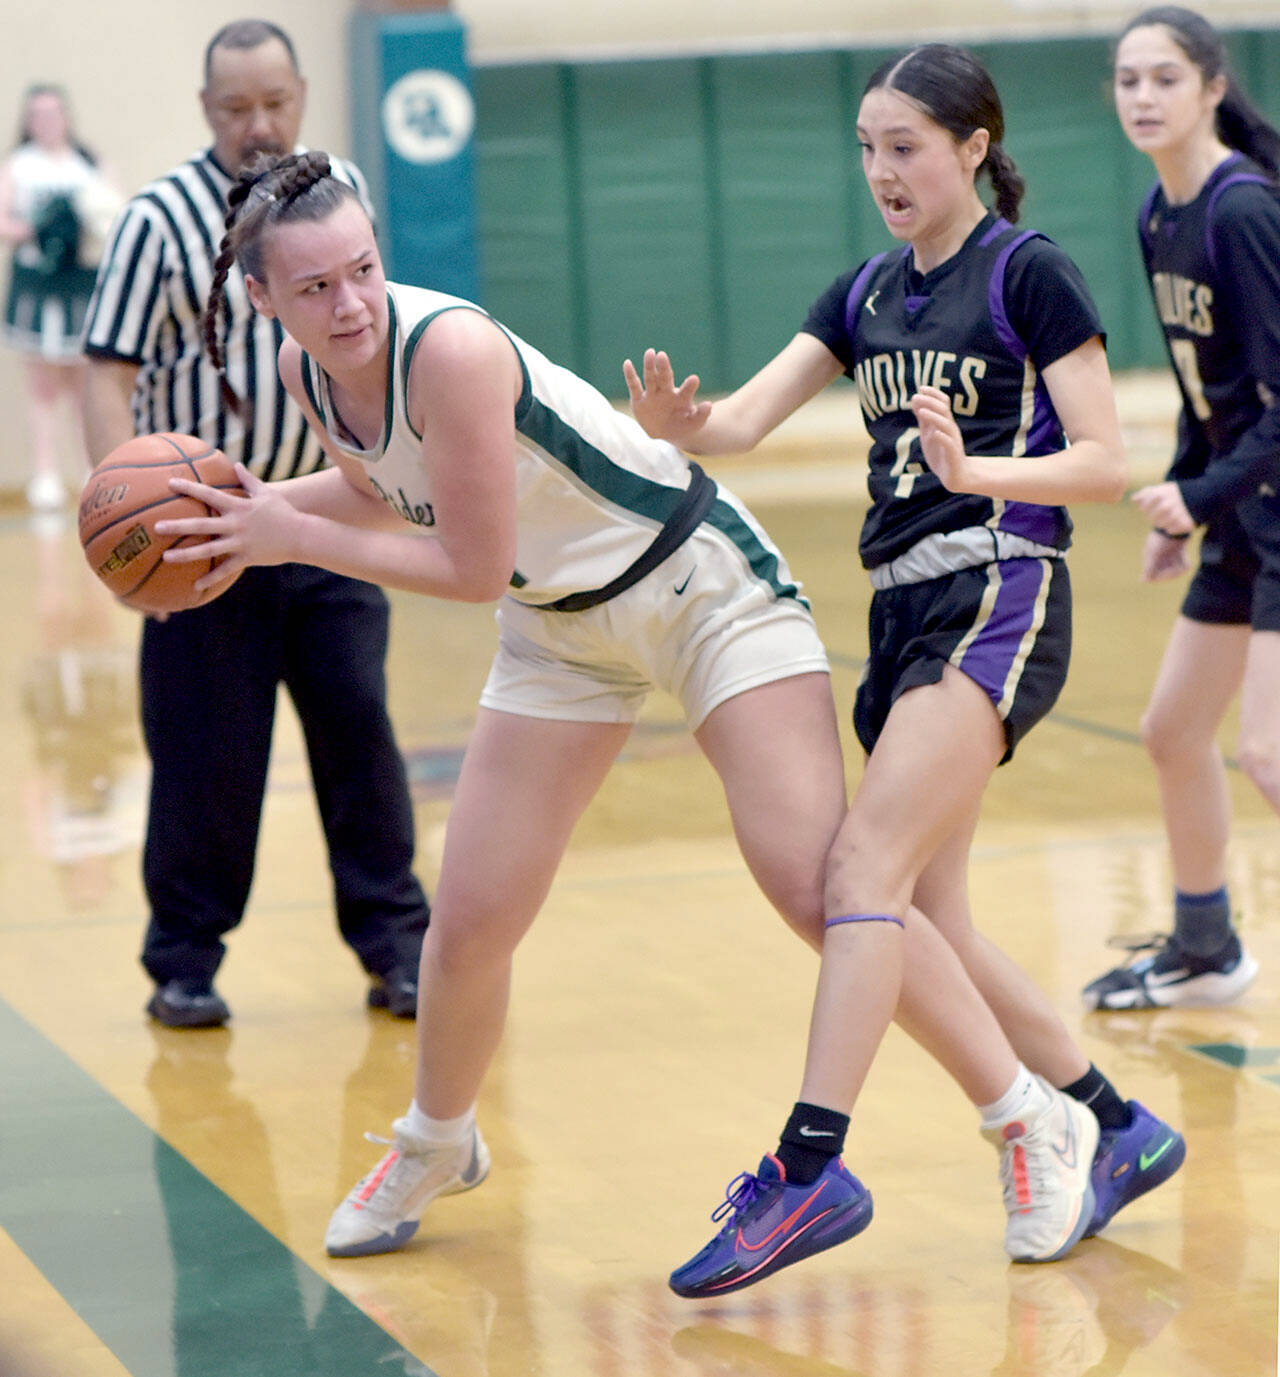 KEITH THORPE/PENINSULA DAILY NEWS 
Port Angeles' Lexie Smith, left, leans out of bounds before passing past the defense of Sequim's Graciela Chartraw on Tuesday night in Port Angeles.